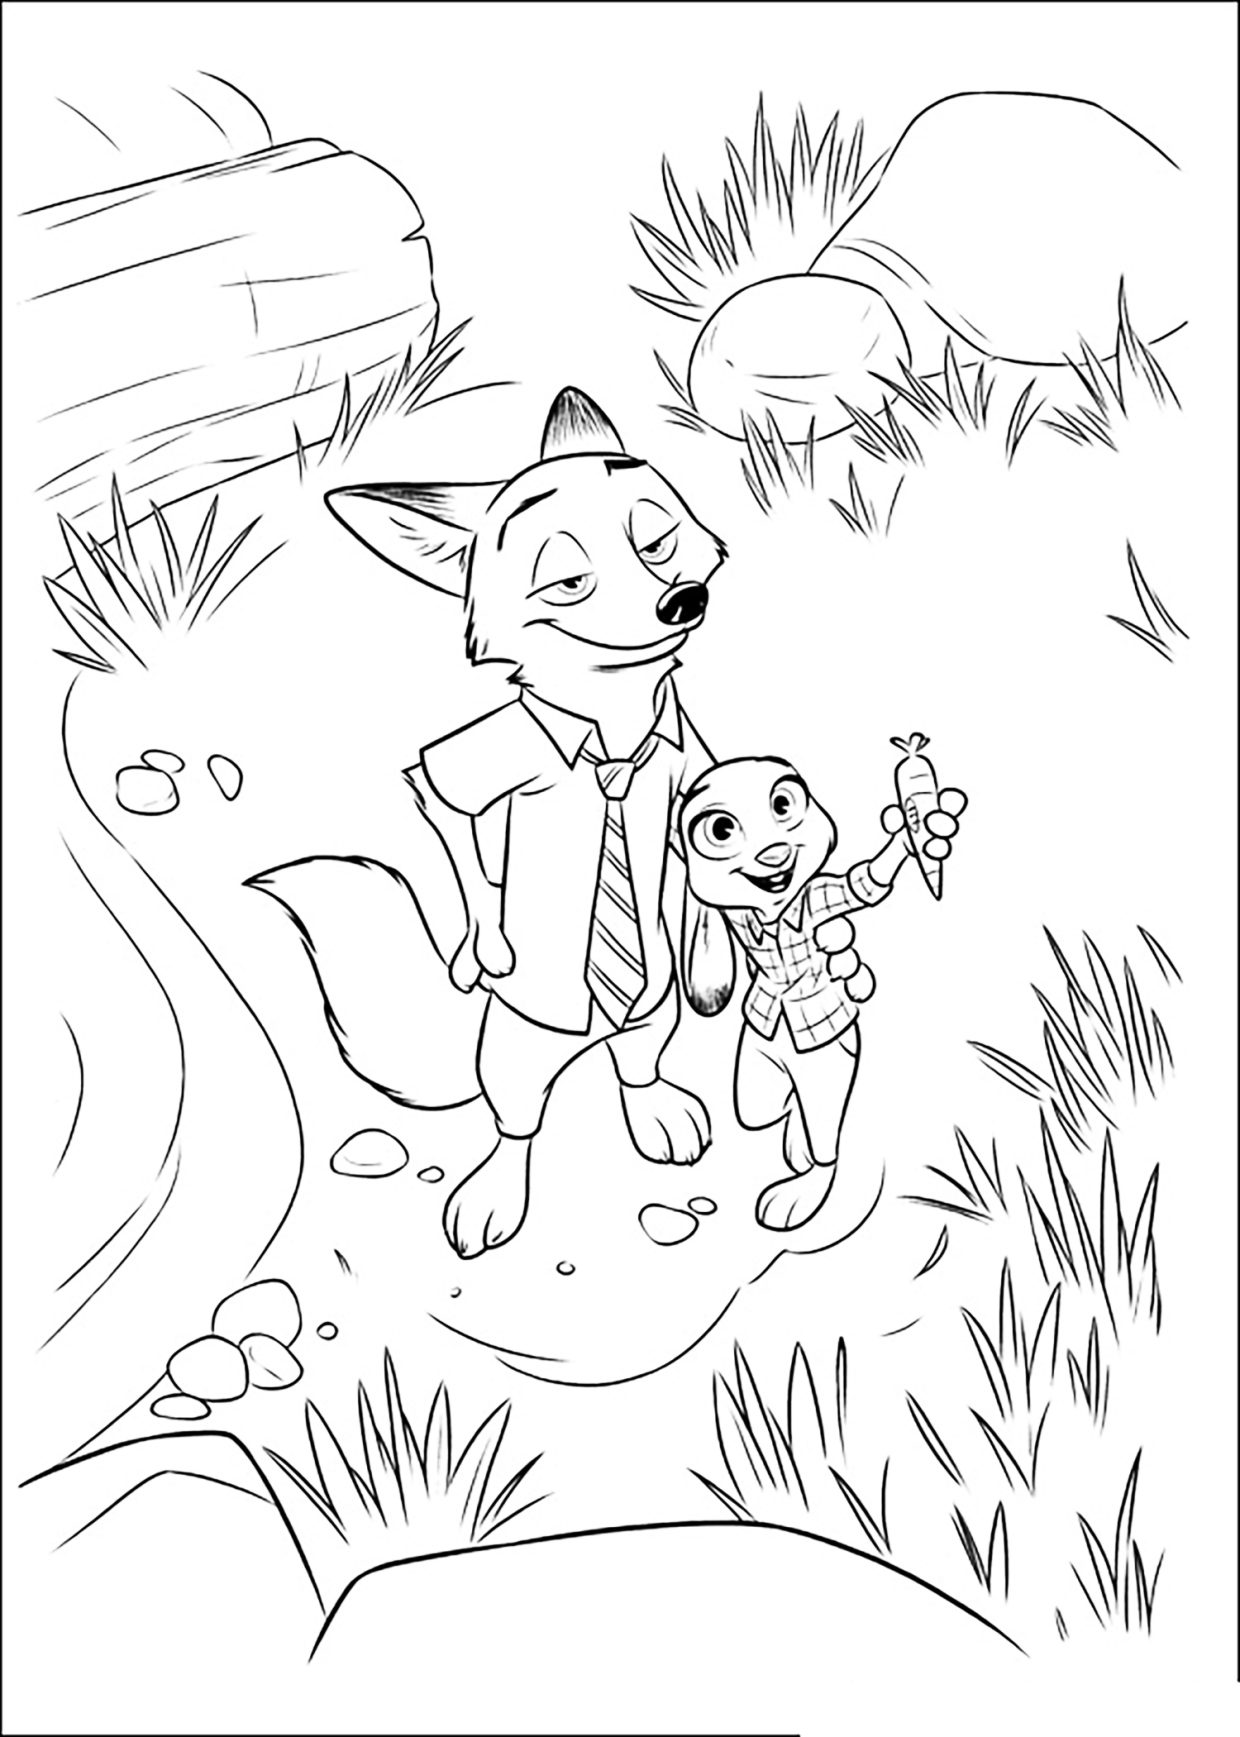 Zootopia Coloring Pages